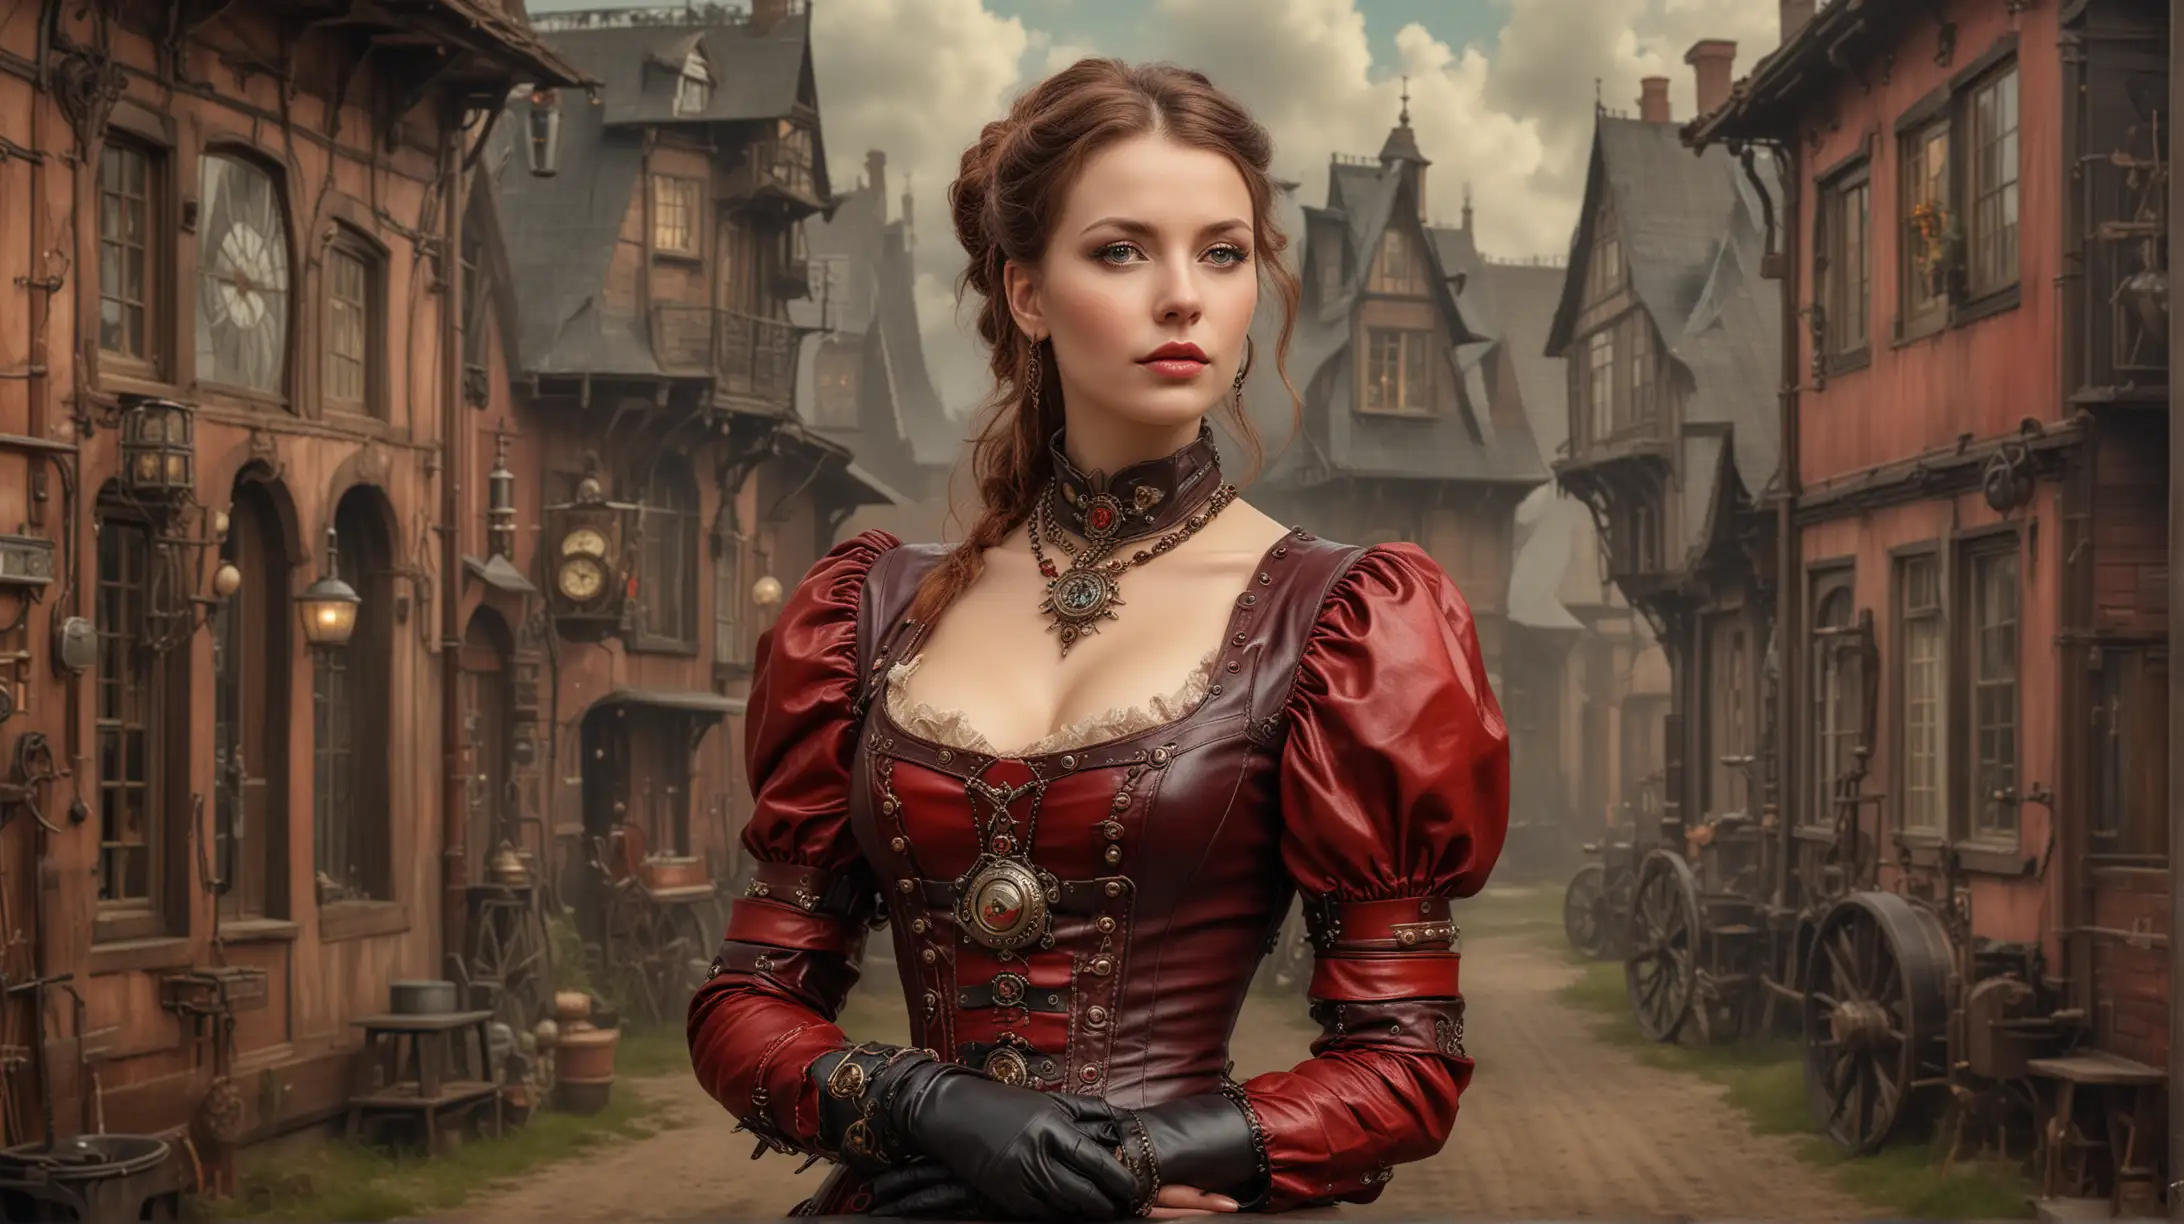 Steampunk Noble Woman in Leather Bloodred Dress at Her Steampunk House